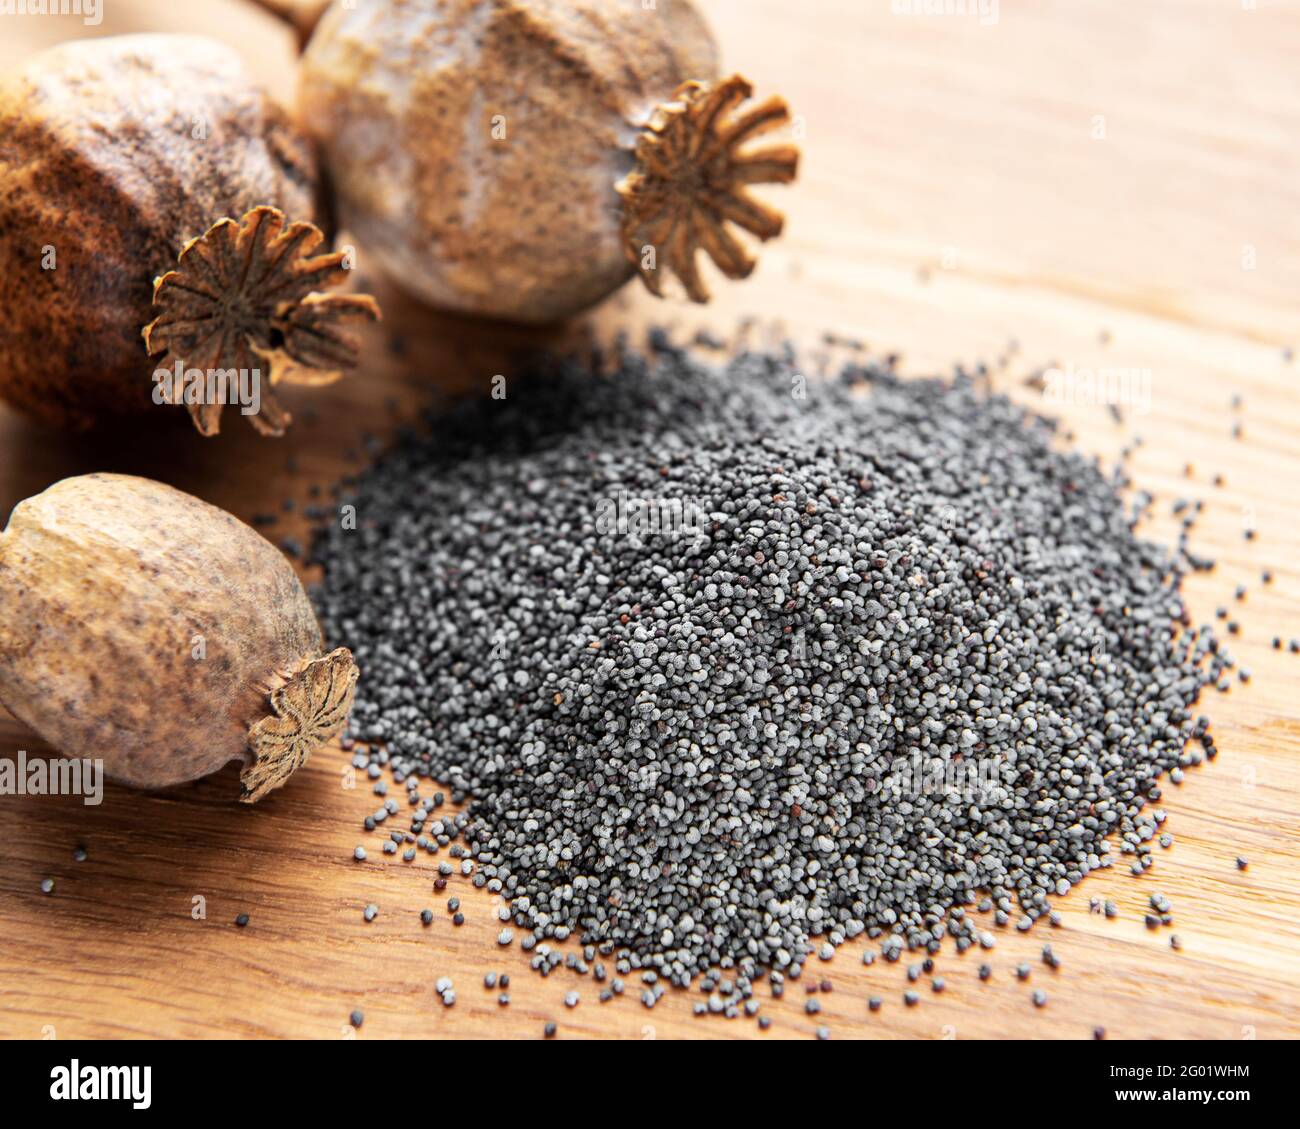 Poppy seeds and poppyhead on the wooden table Stock Photo